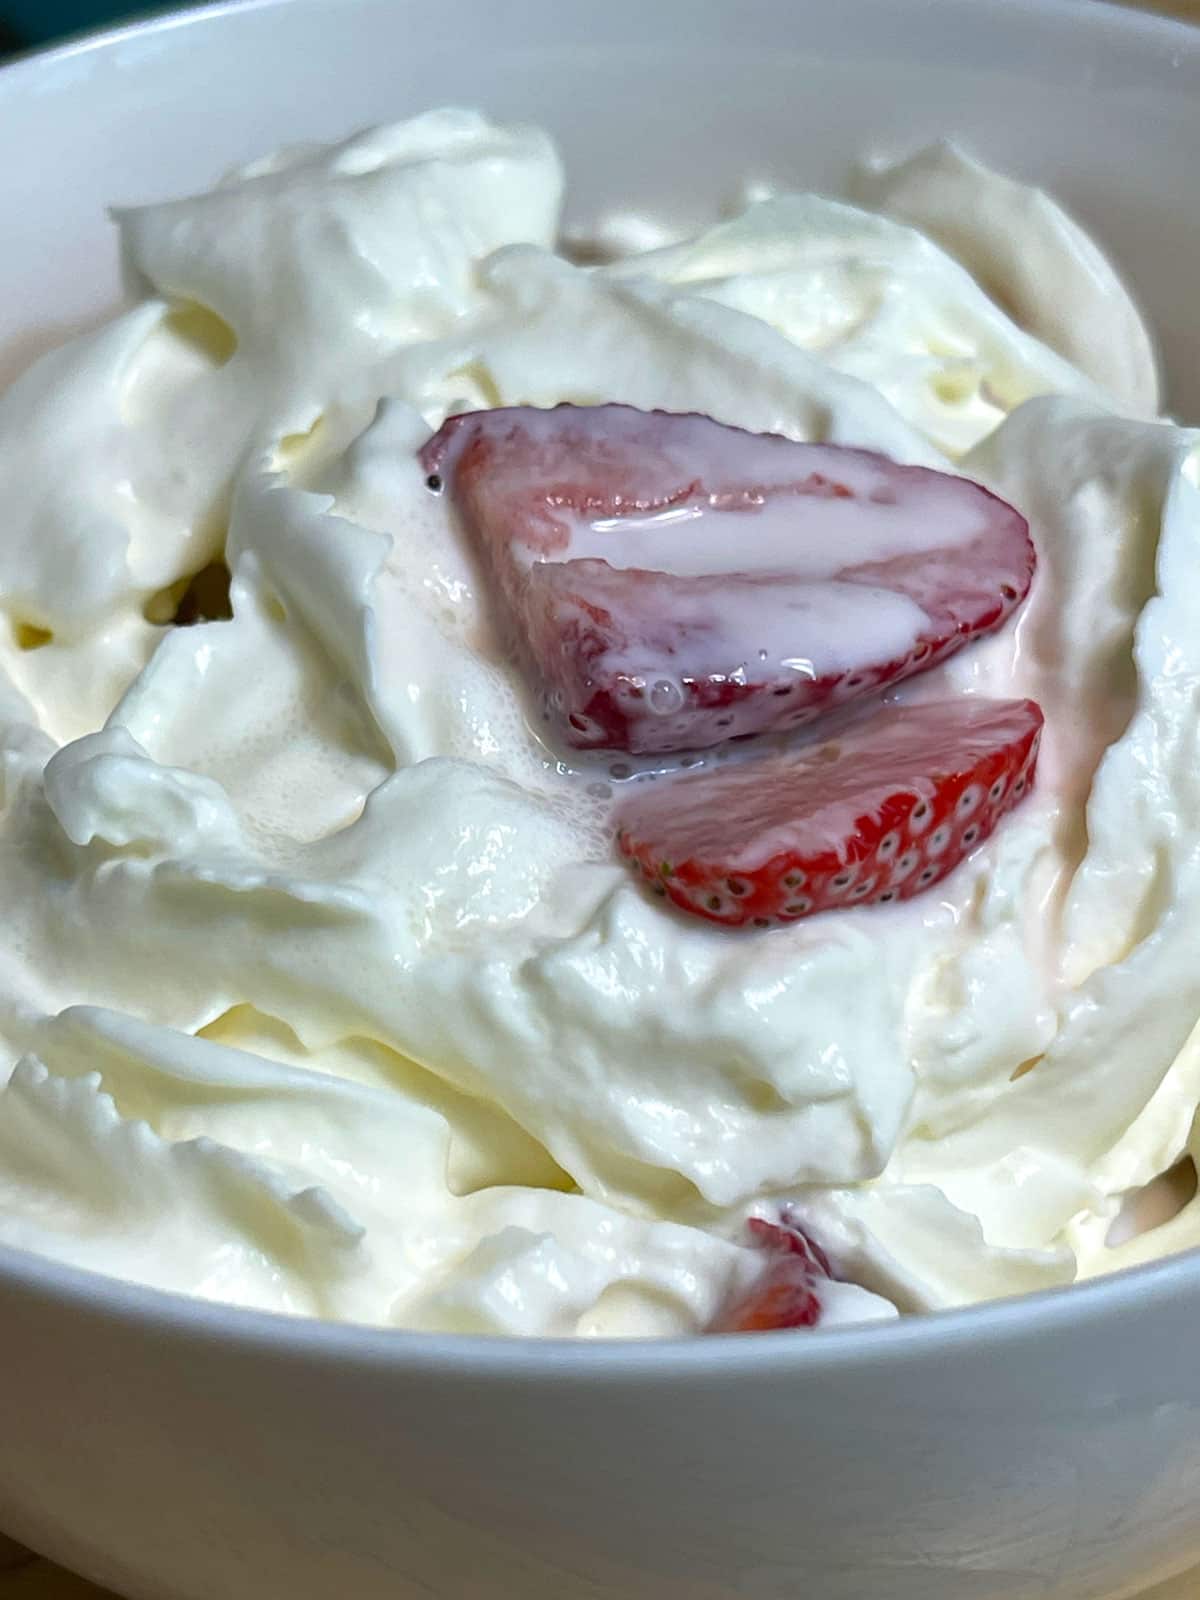 strawberries and cream with whipped cream topping